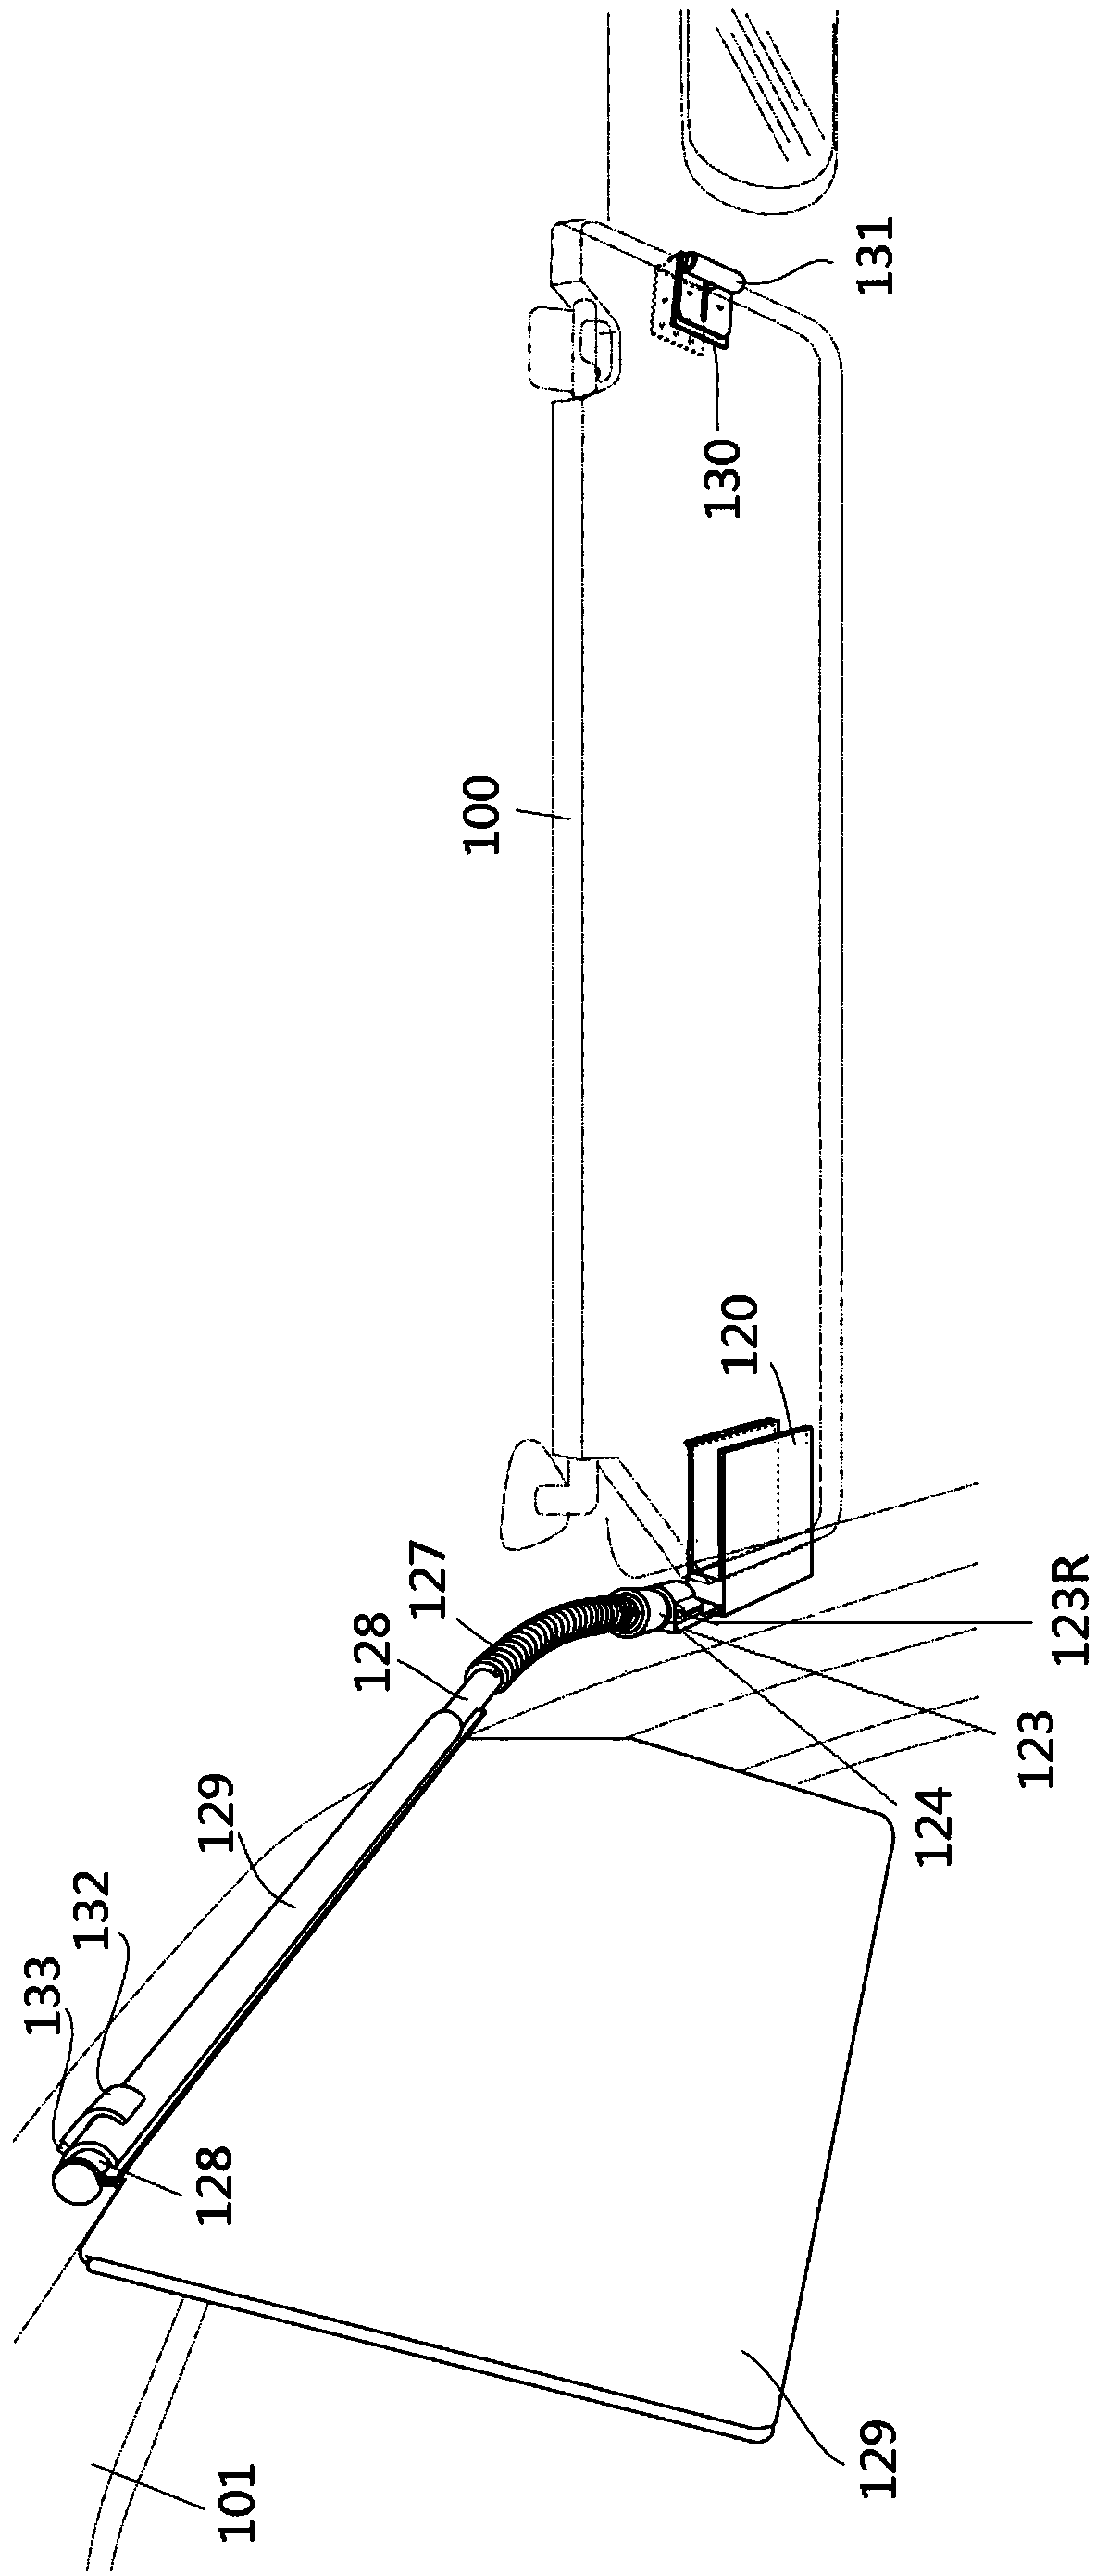 Auxiliary solar protection device